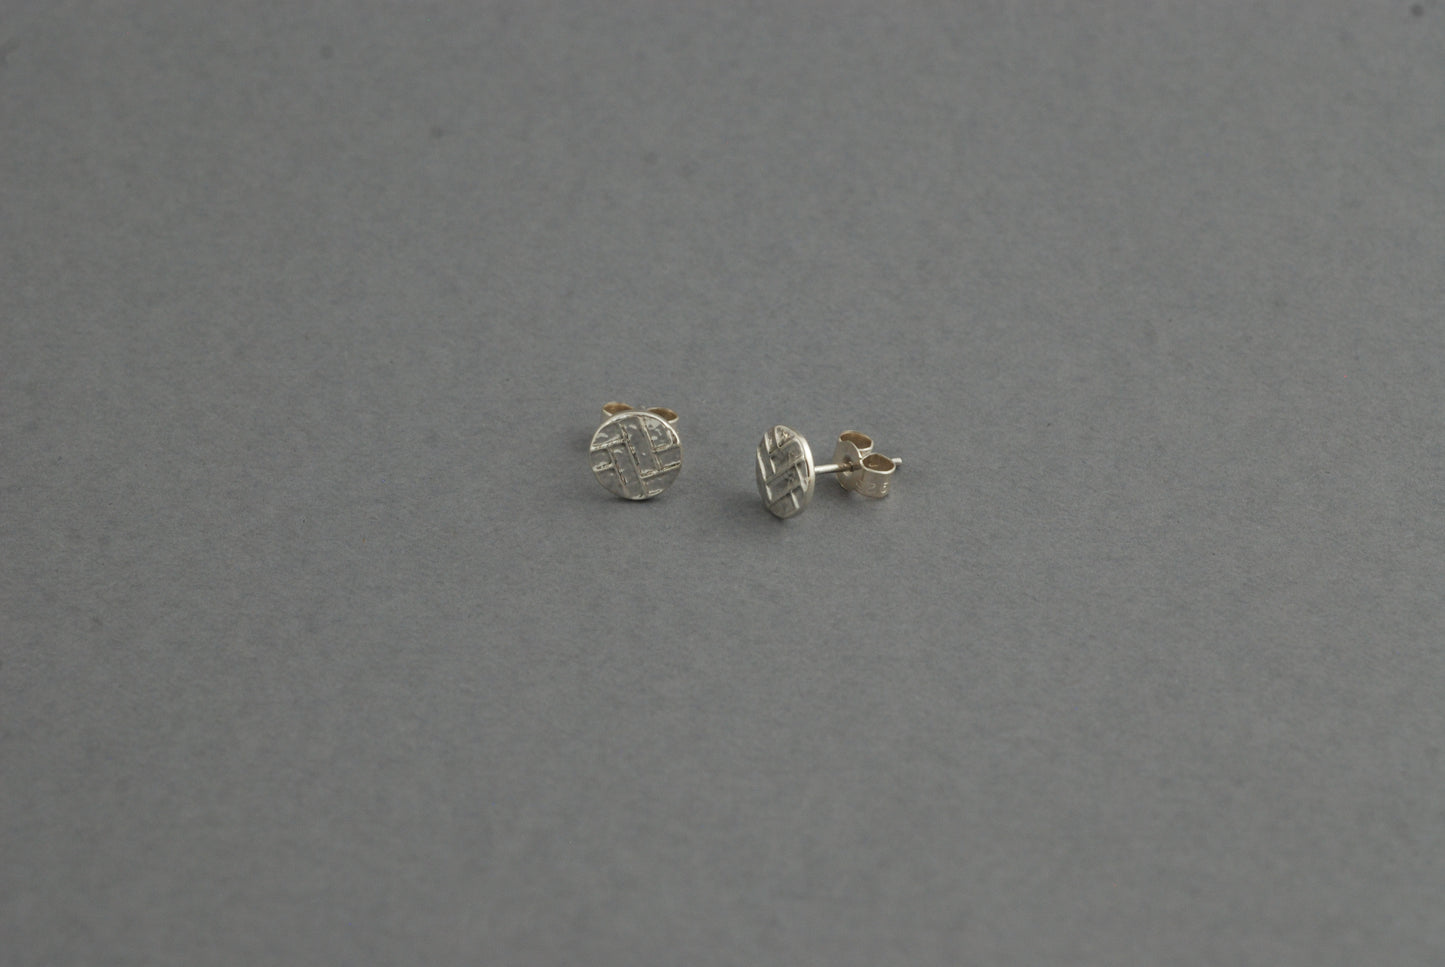 Statement Sterling Silver Stud Earrings with Woven Texture